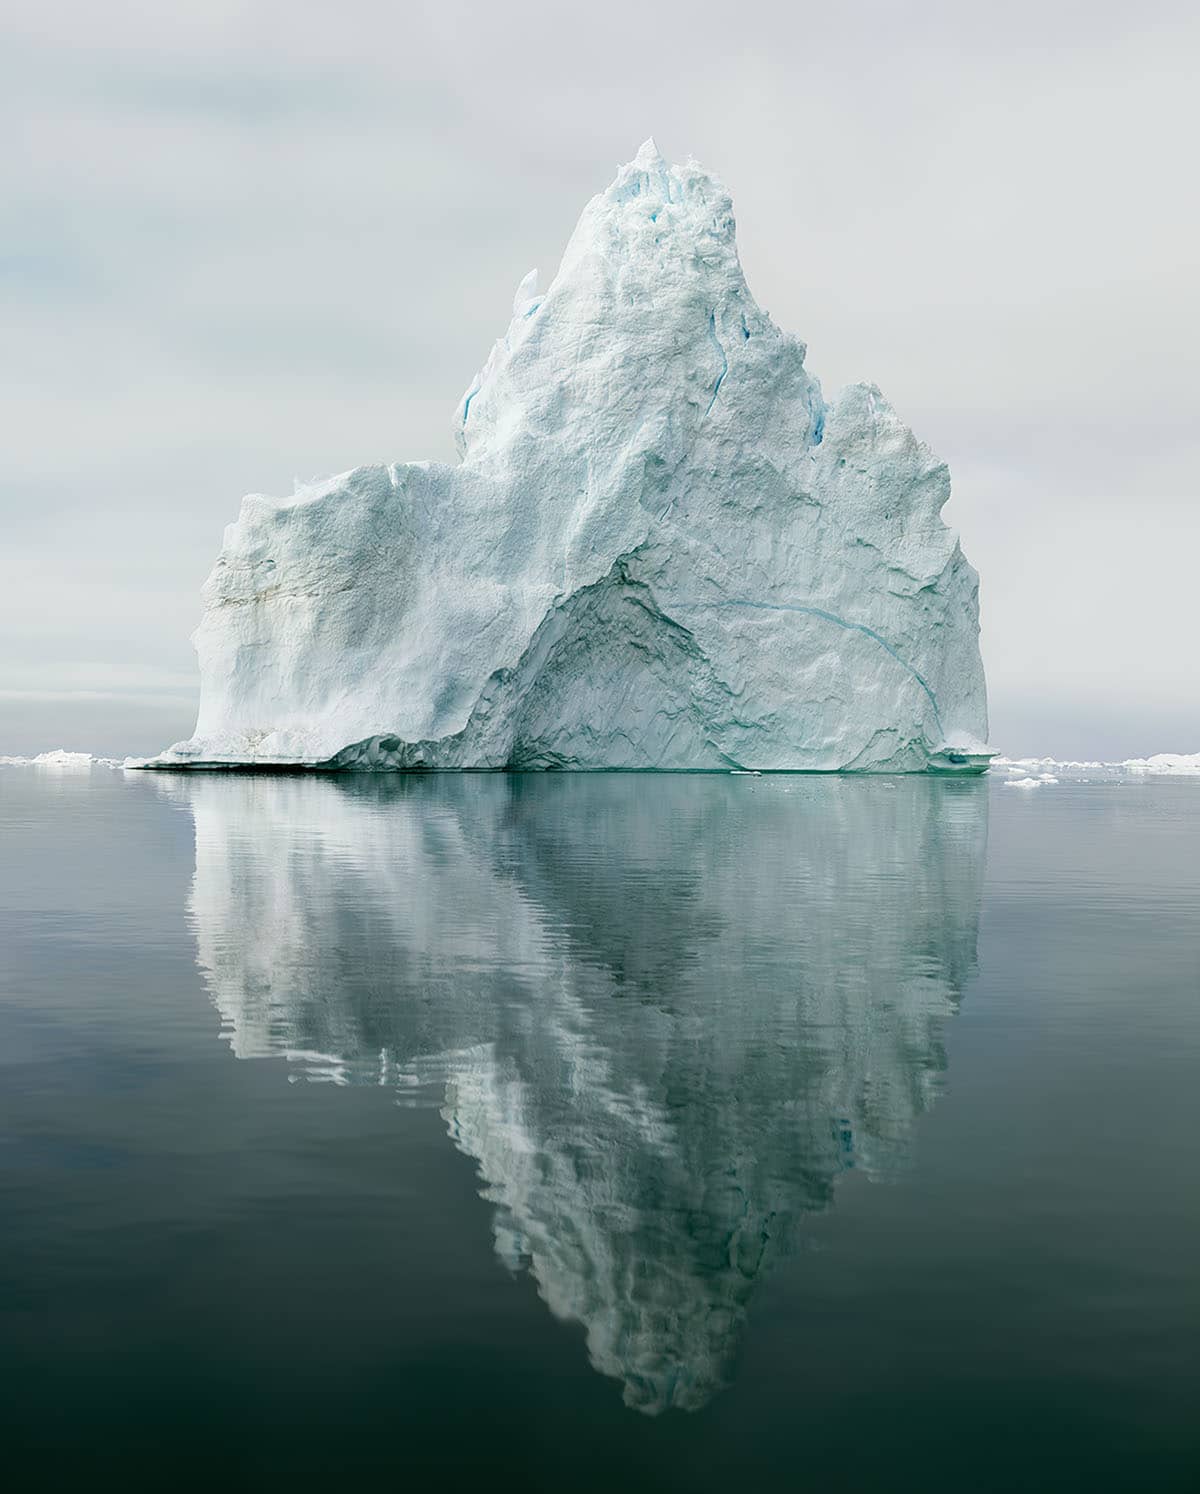 Icebergs in Ilulissat by Olaf Otto Becker